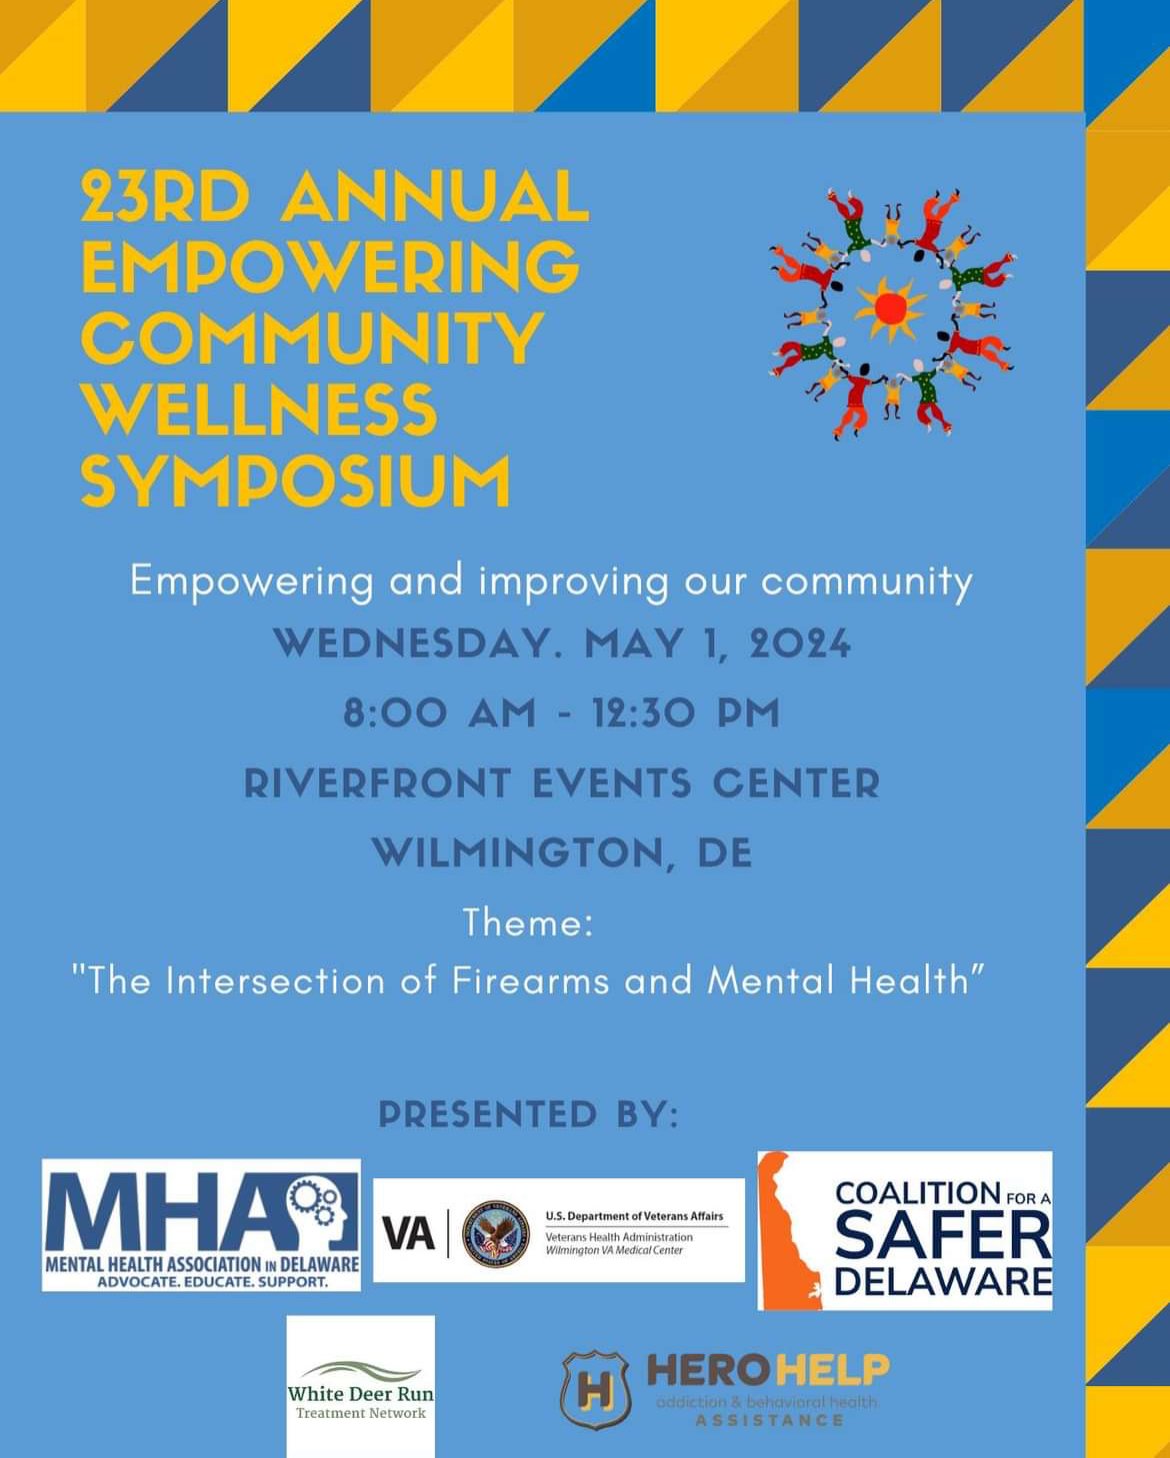 Happy Monday West Side Grows Together Community

Here's some events we're looking forward to around town and/or in the West Side.

1️⃣ 23rd Annual ECW Symposium happening this WEDNESDAY! Presented by @mhadelaware and @asaferdelaware 

2️⃣ Dinner with